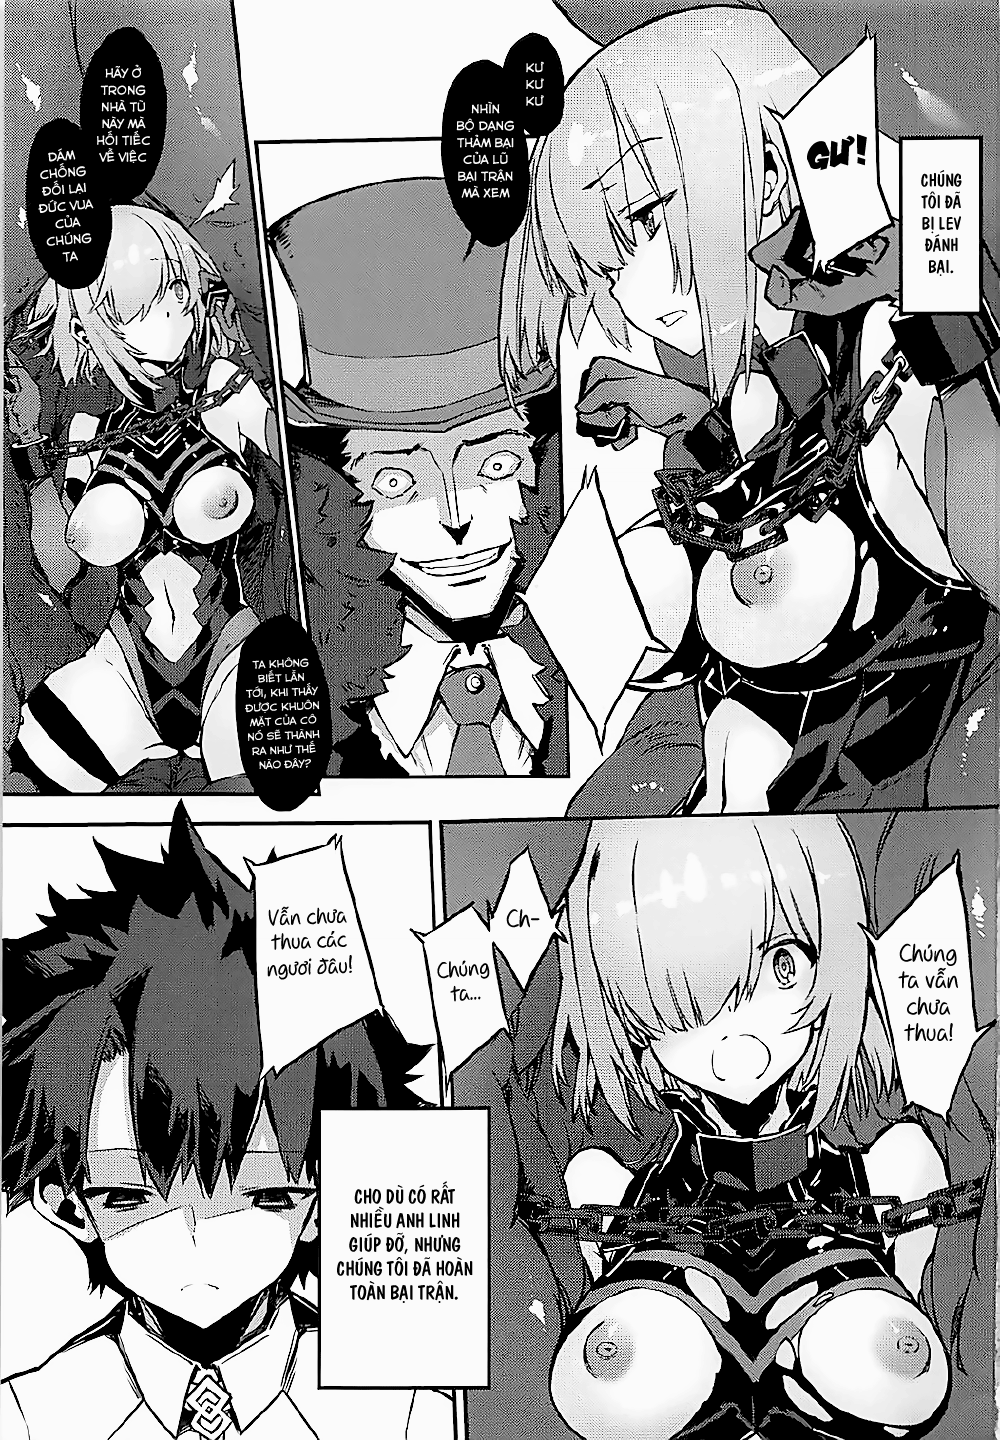 (C92) [Kenja Time (Zutta)] Bad End Catharsis Vol. 7 (Fate/Grand Order) [Vietnamese Tiếng Việt] [T.K Translation Team - Seian] (C92) [けんじゃたいむ (Zutta)] Bad End Catharsis Vol.7 (Fate/Grand Order) [ベトナム翻訳]